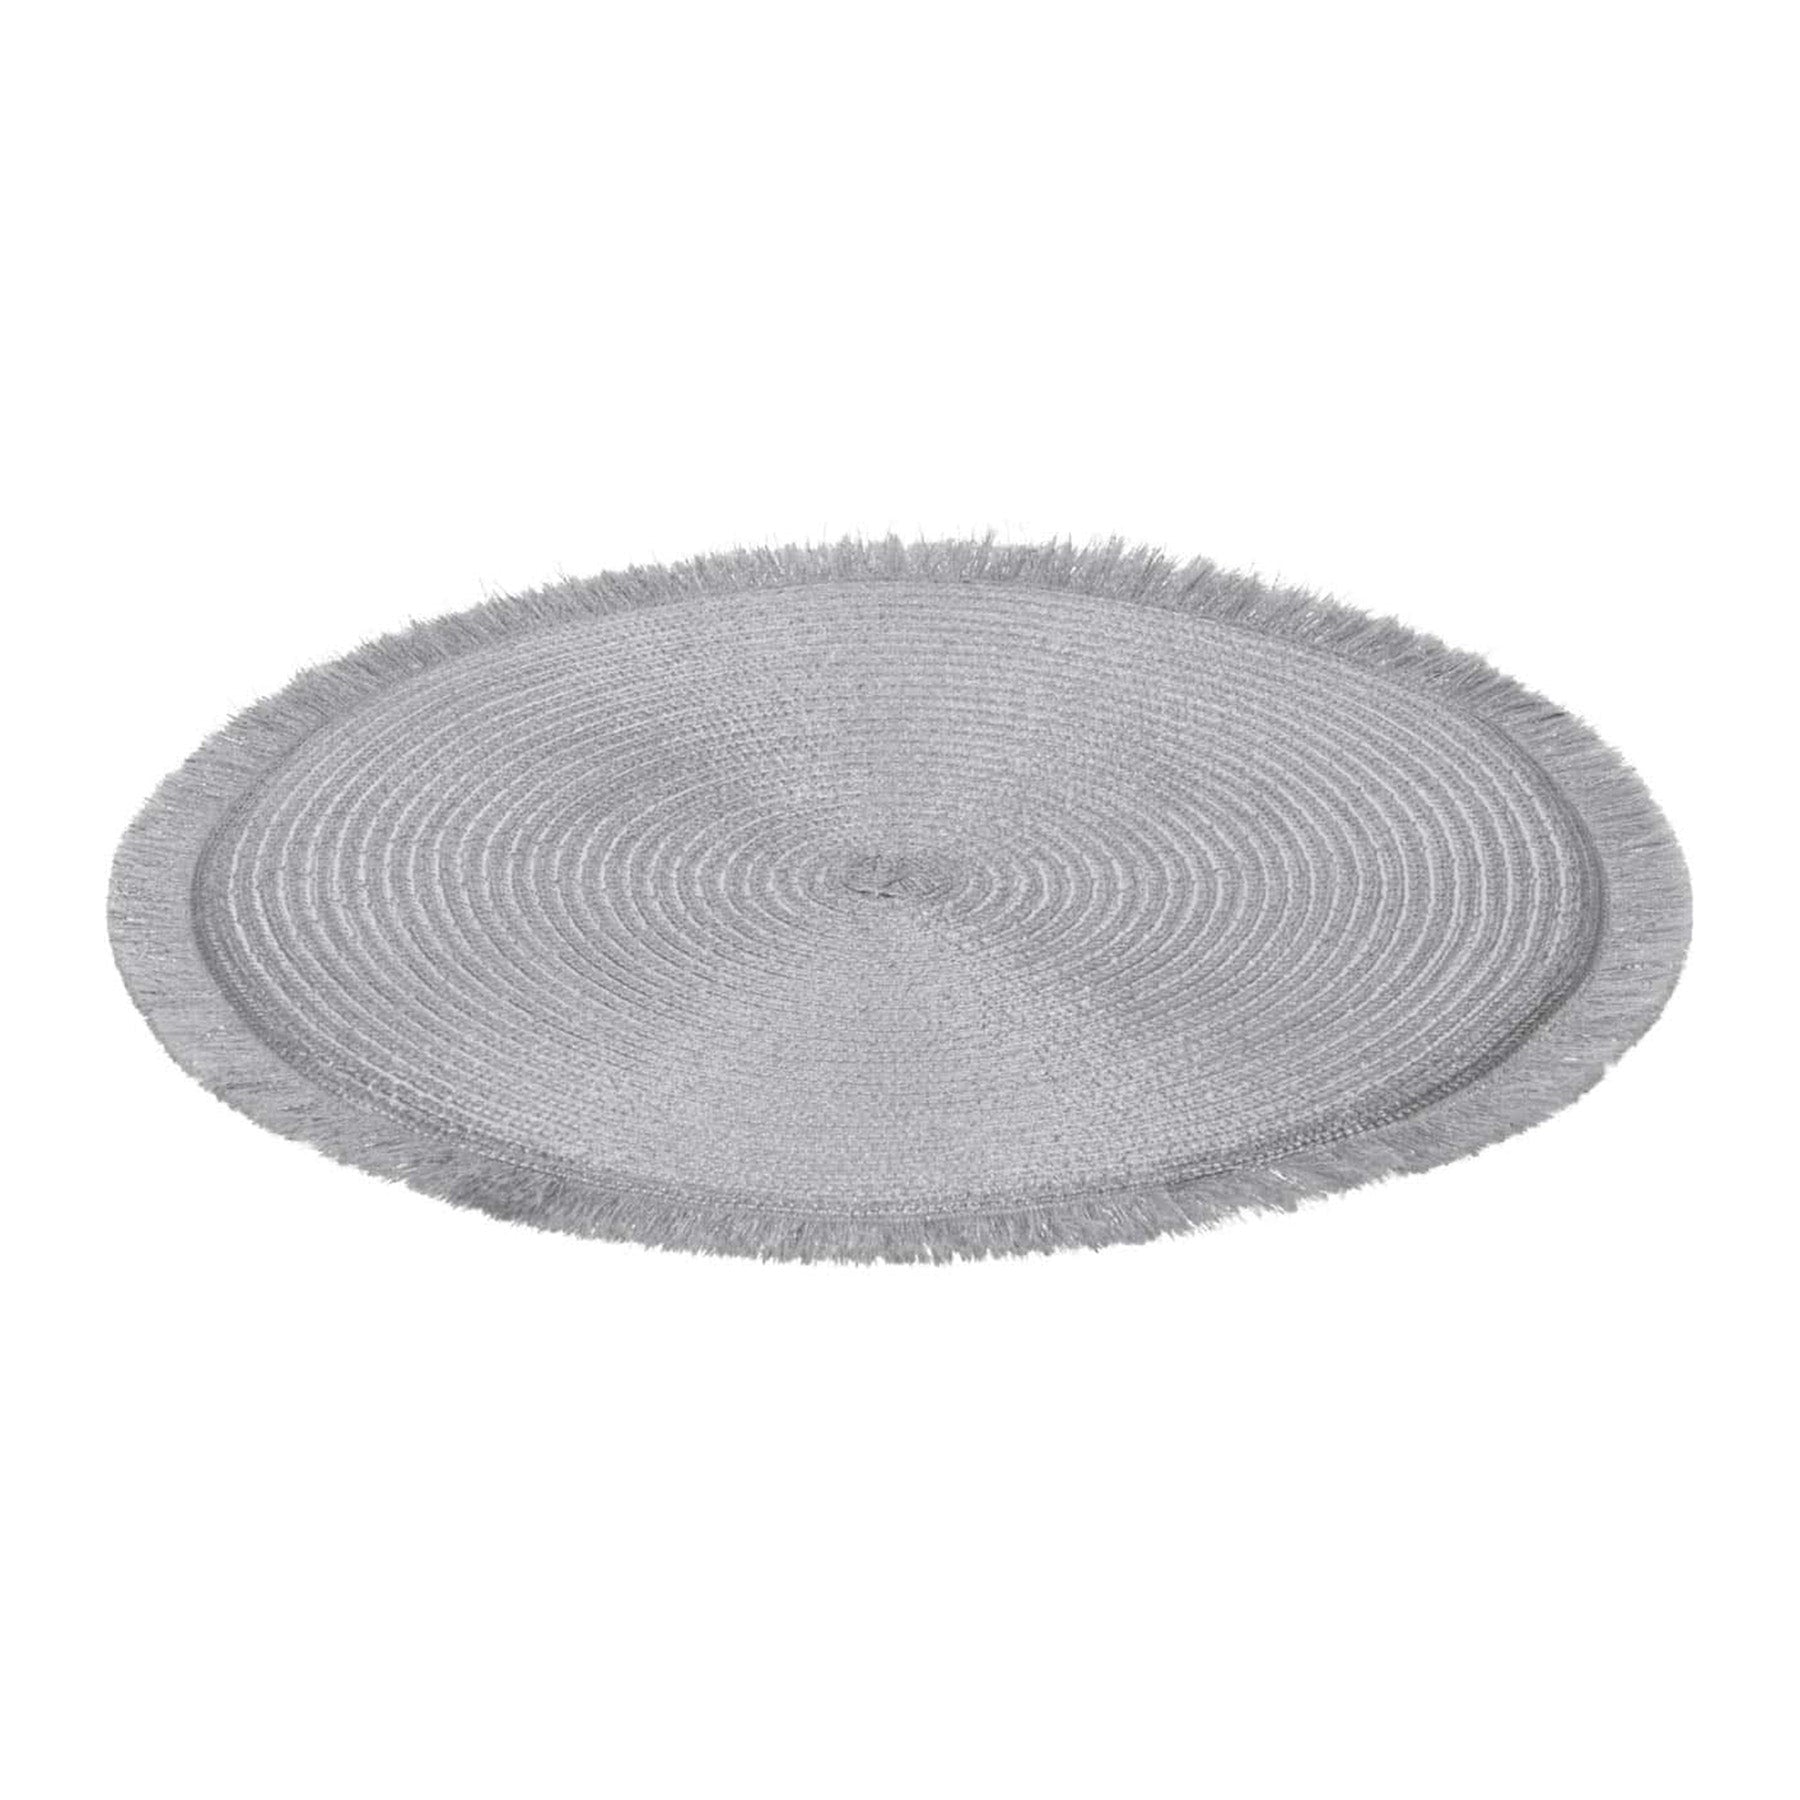 Placemat Woven - Silver